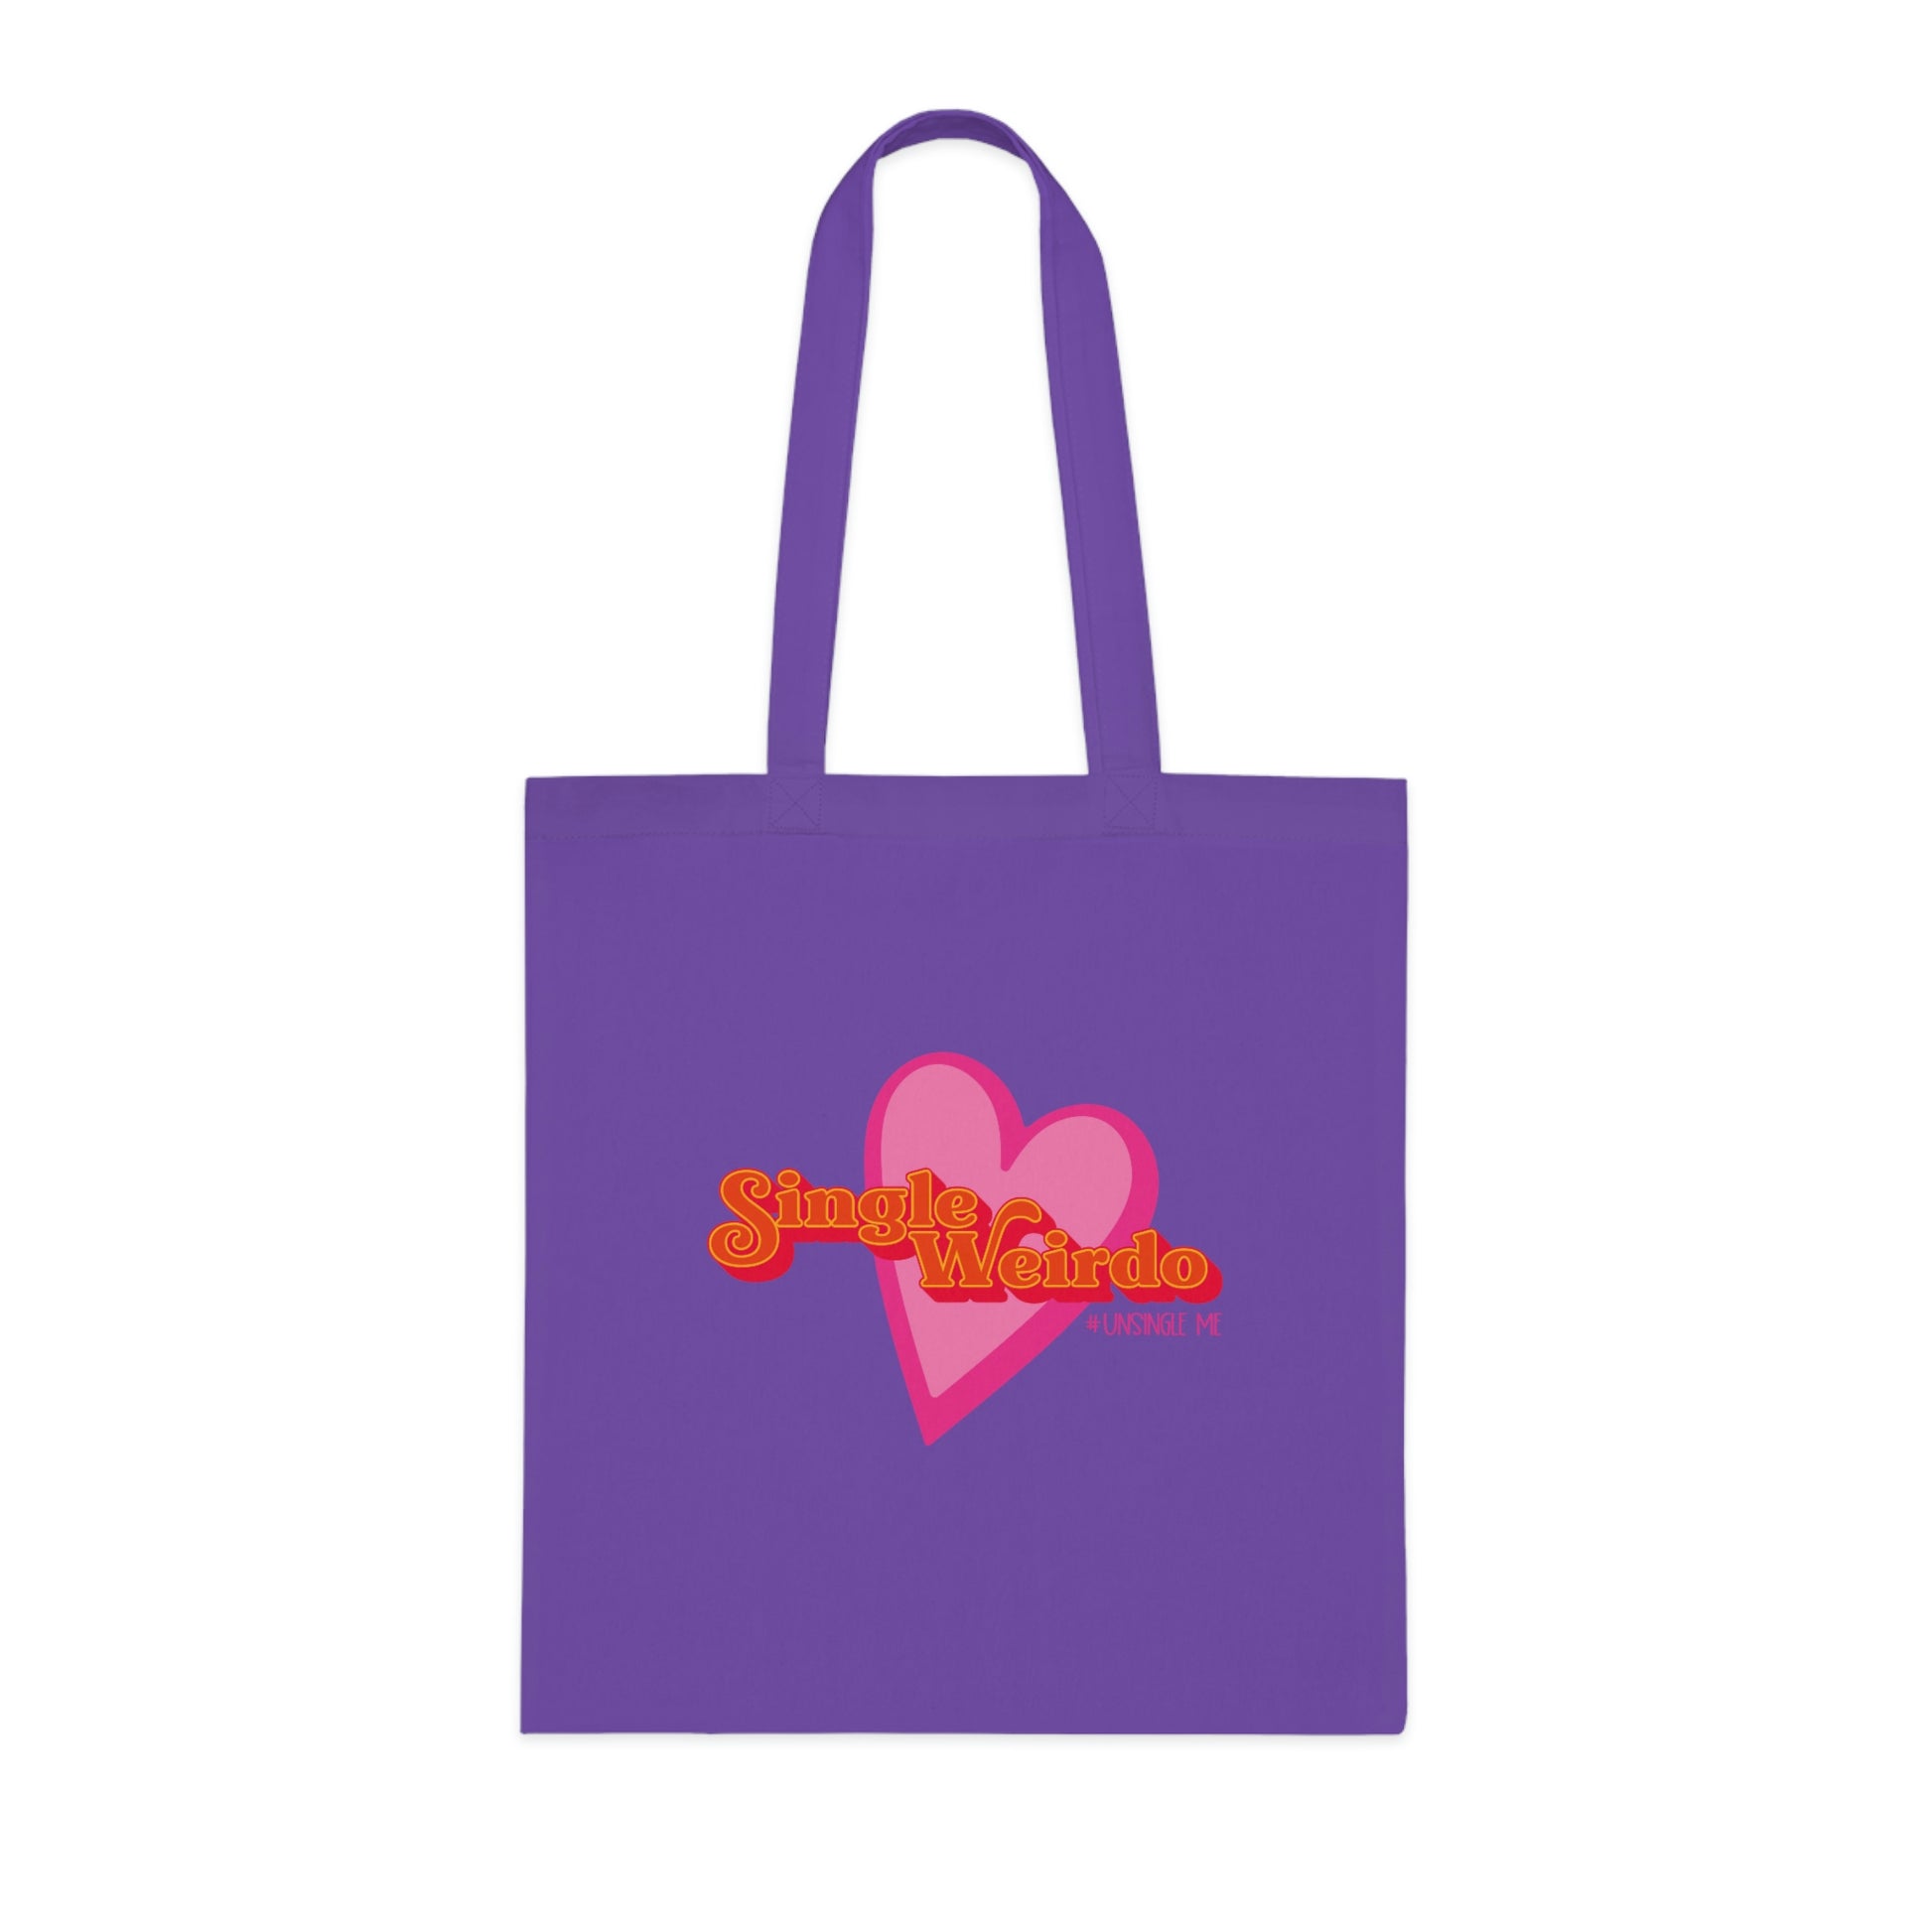 Weirdo | Purple cotton tote bag for you weirdos who are still single! Are you tired of being single? Take out this bag when you go for you daily groceries and see if someone will react to you bag!